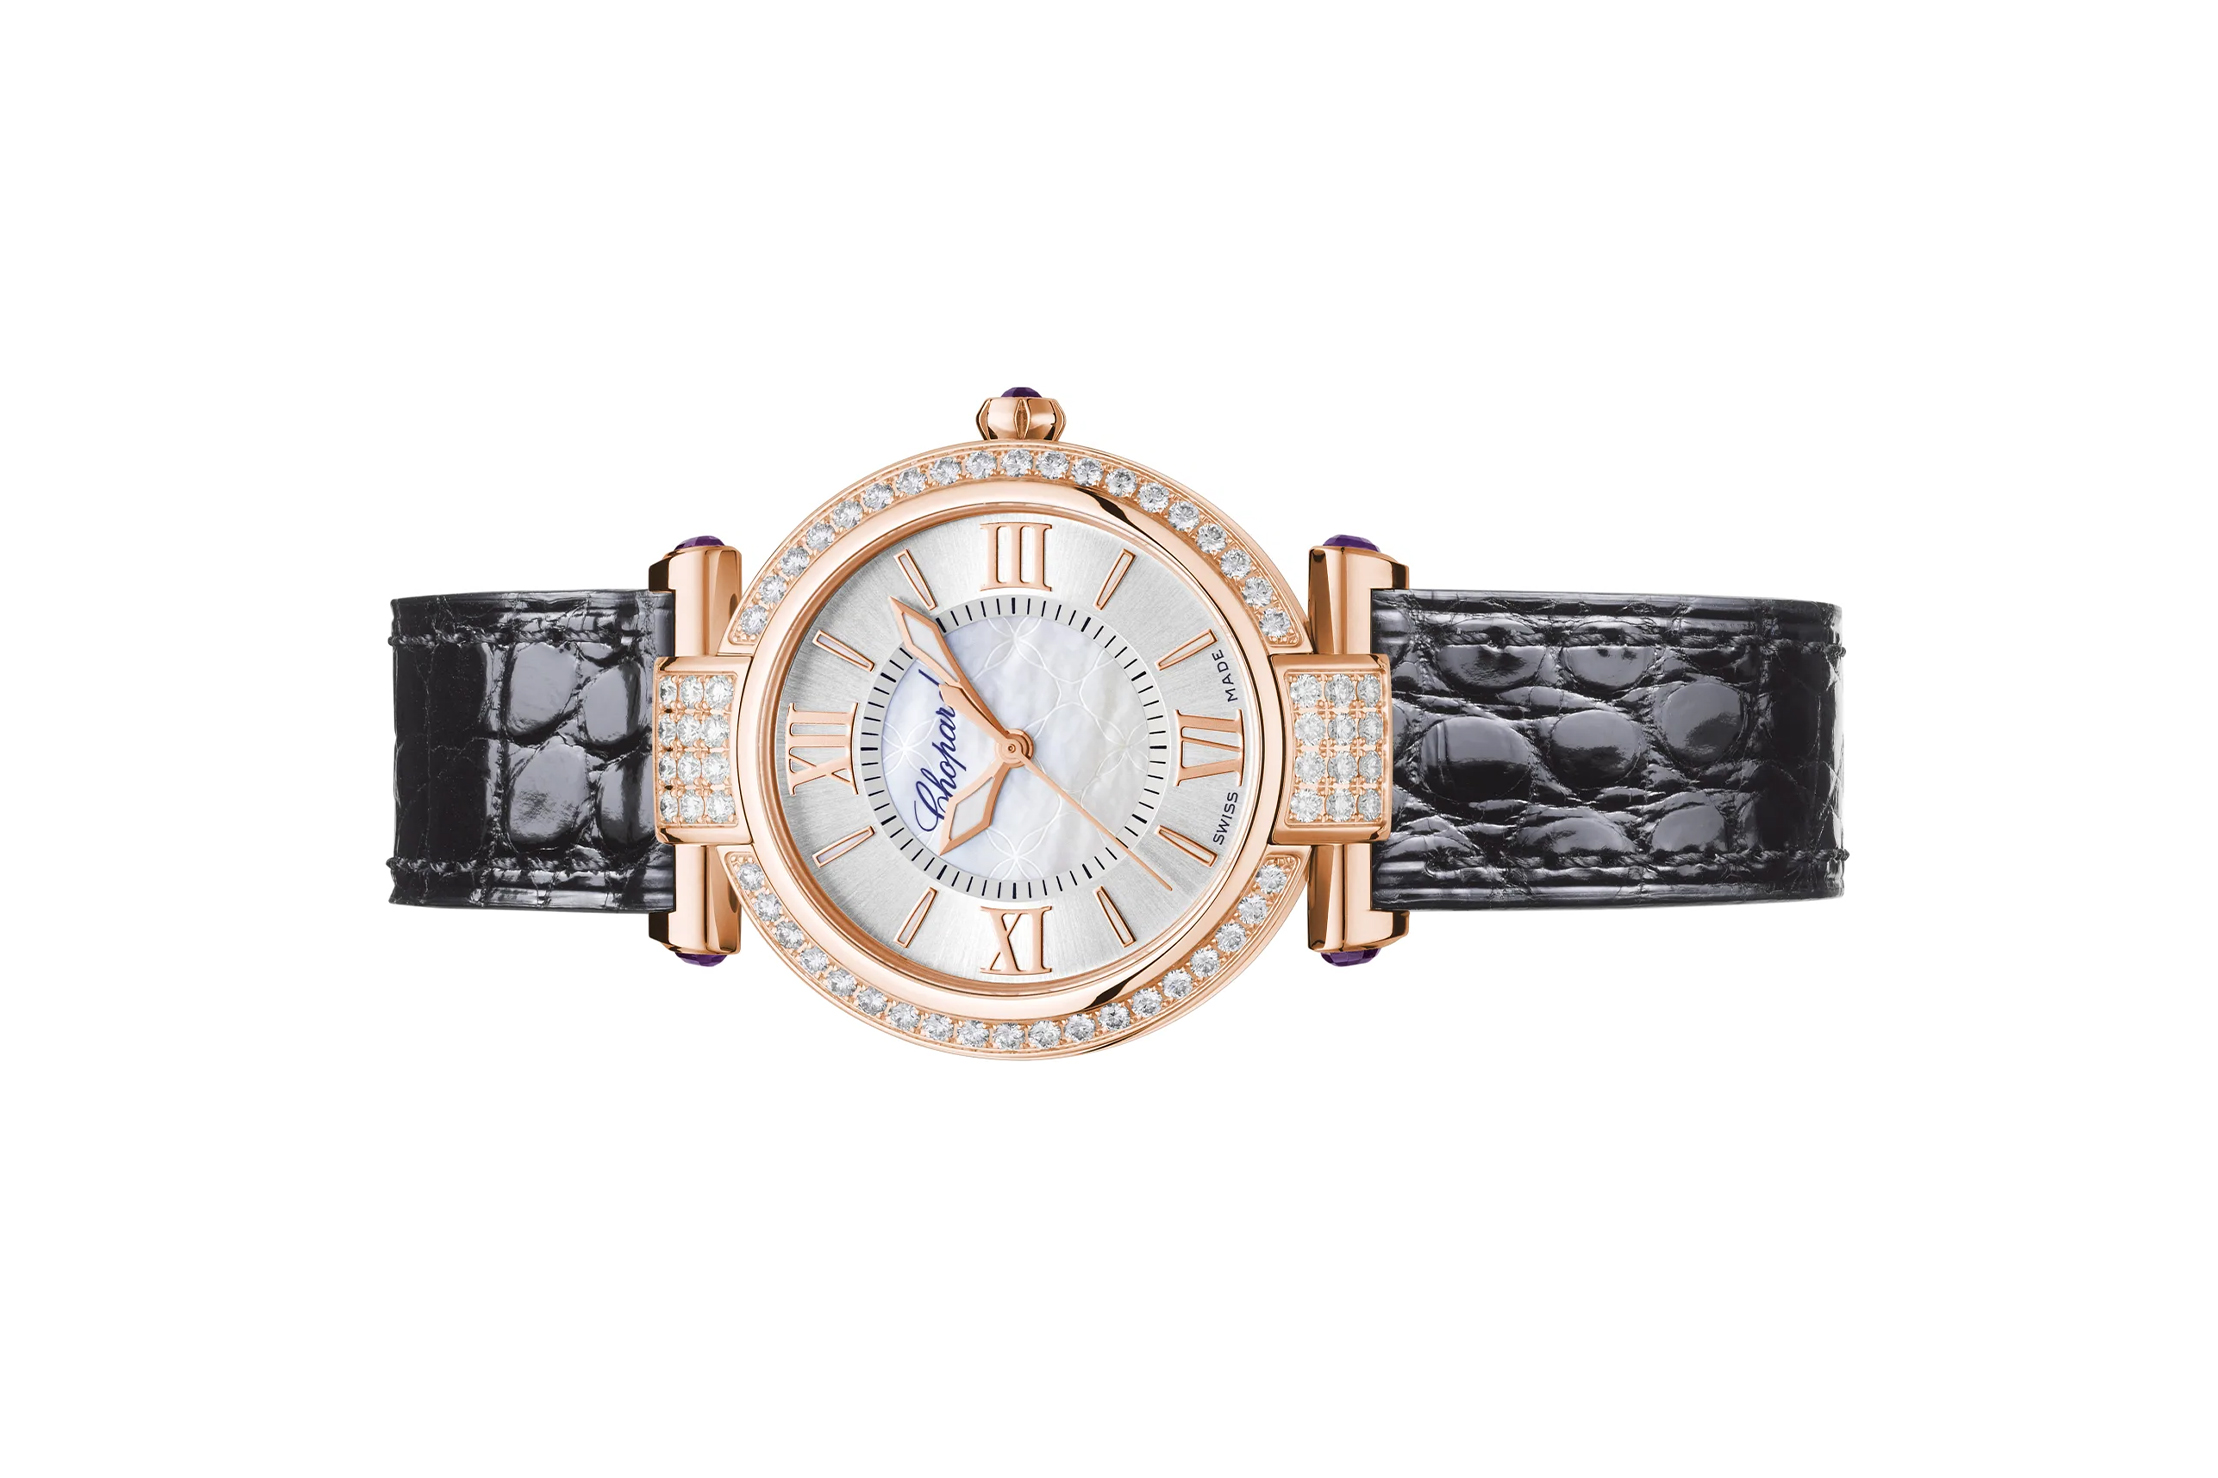 Đồng Hồ Chopard Imperiale 384319-5007